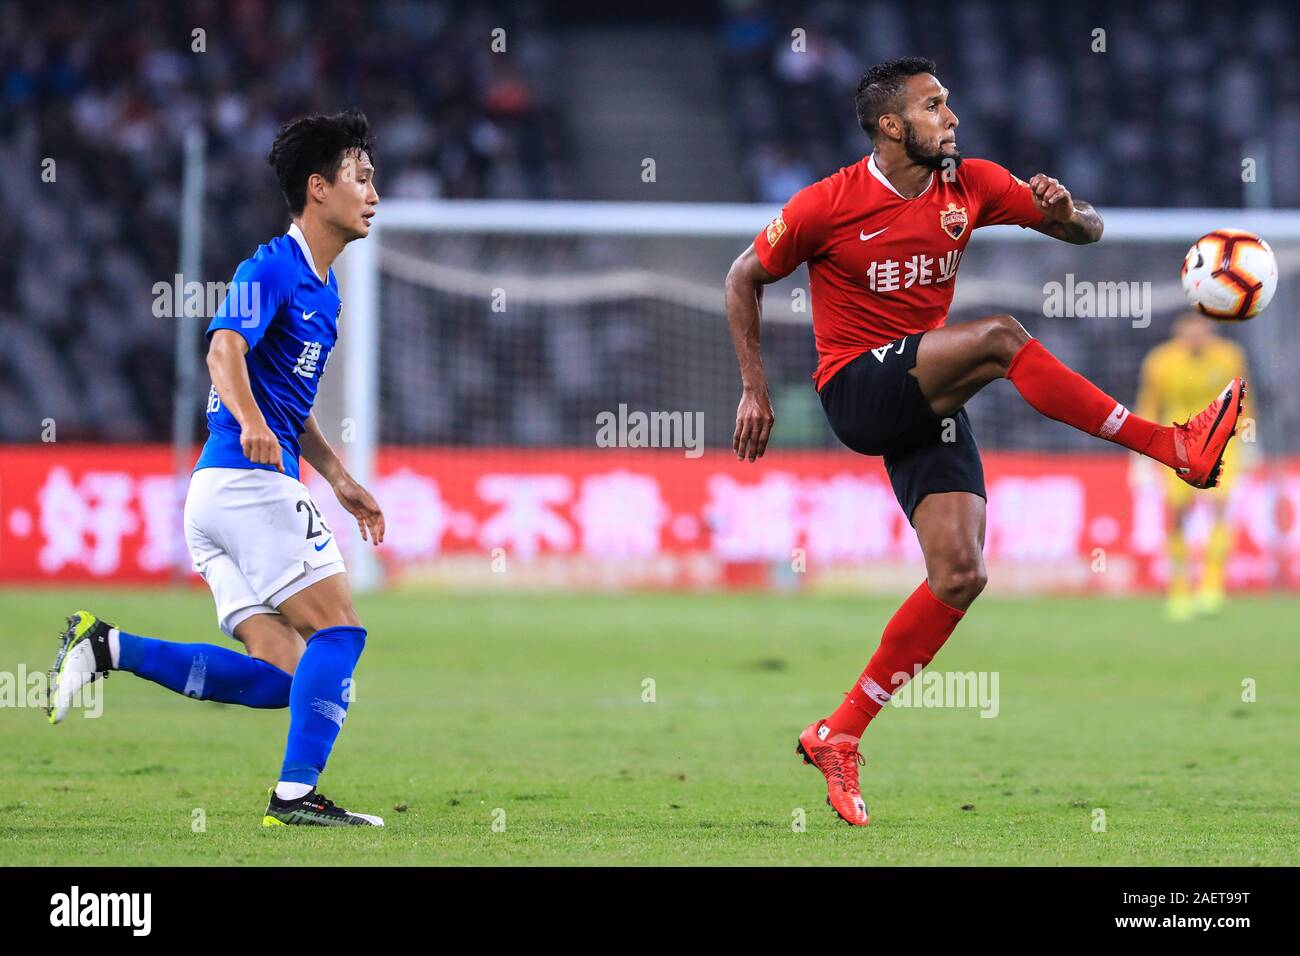 Brazilian-born Portuguese football player Dyego Sousa of Shenzhen F.C., right, passes the ball during the 29th round match of Chinese Football Associa Stock Photo